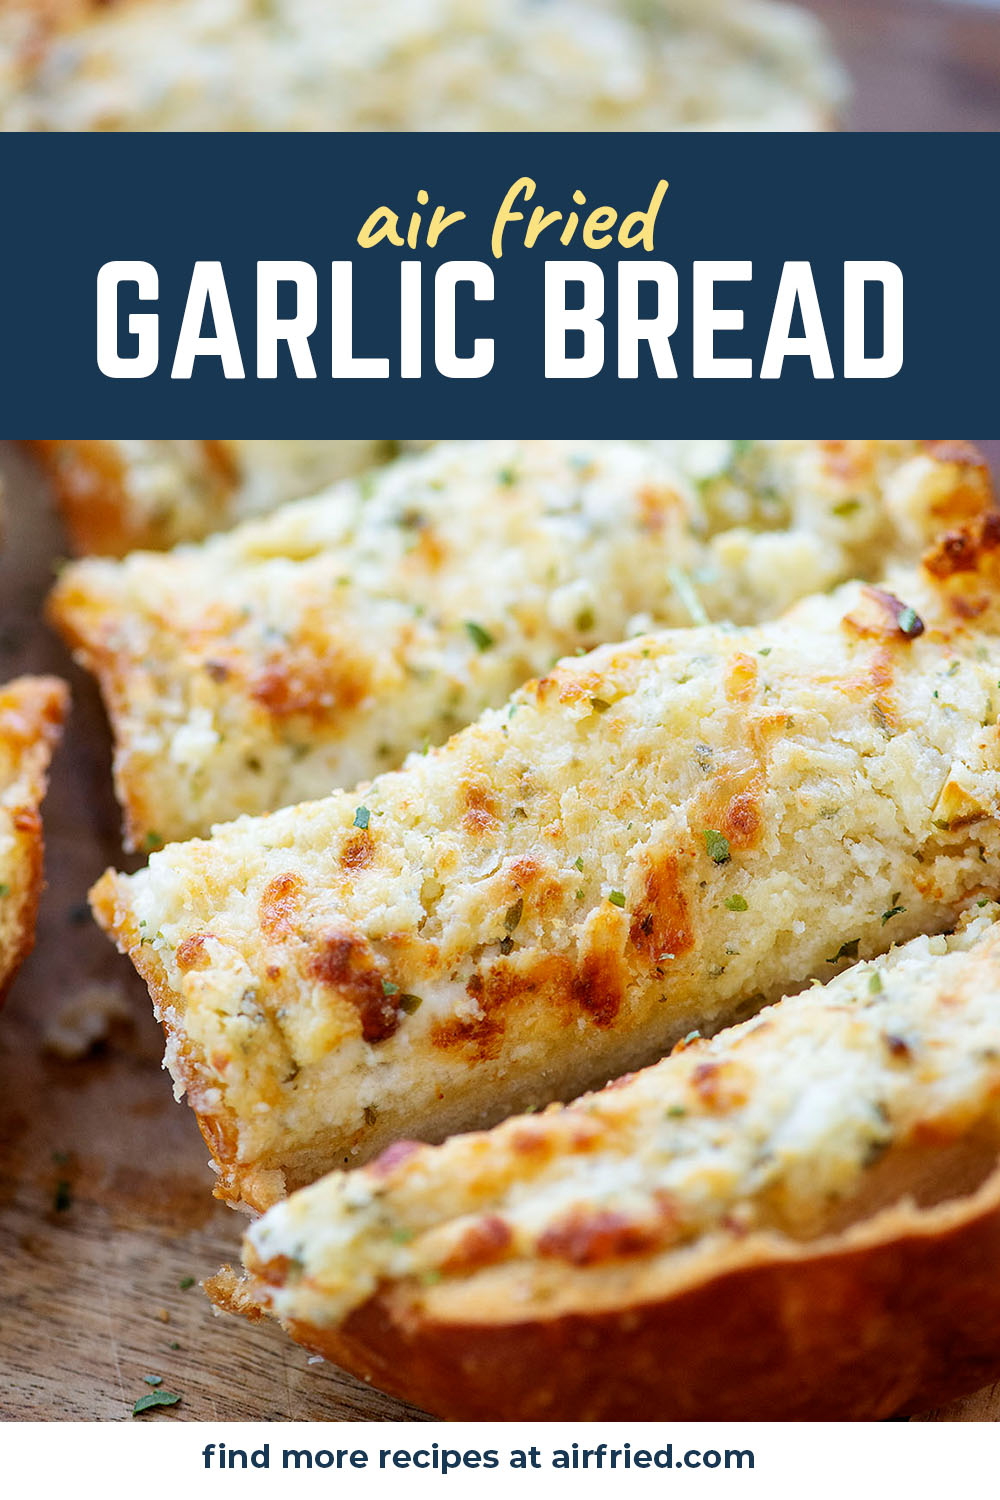 This garlic bread is soft, fluffy, and almost creamy with our wonderful cheese topping!